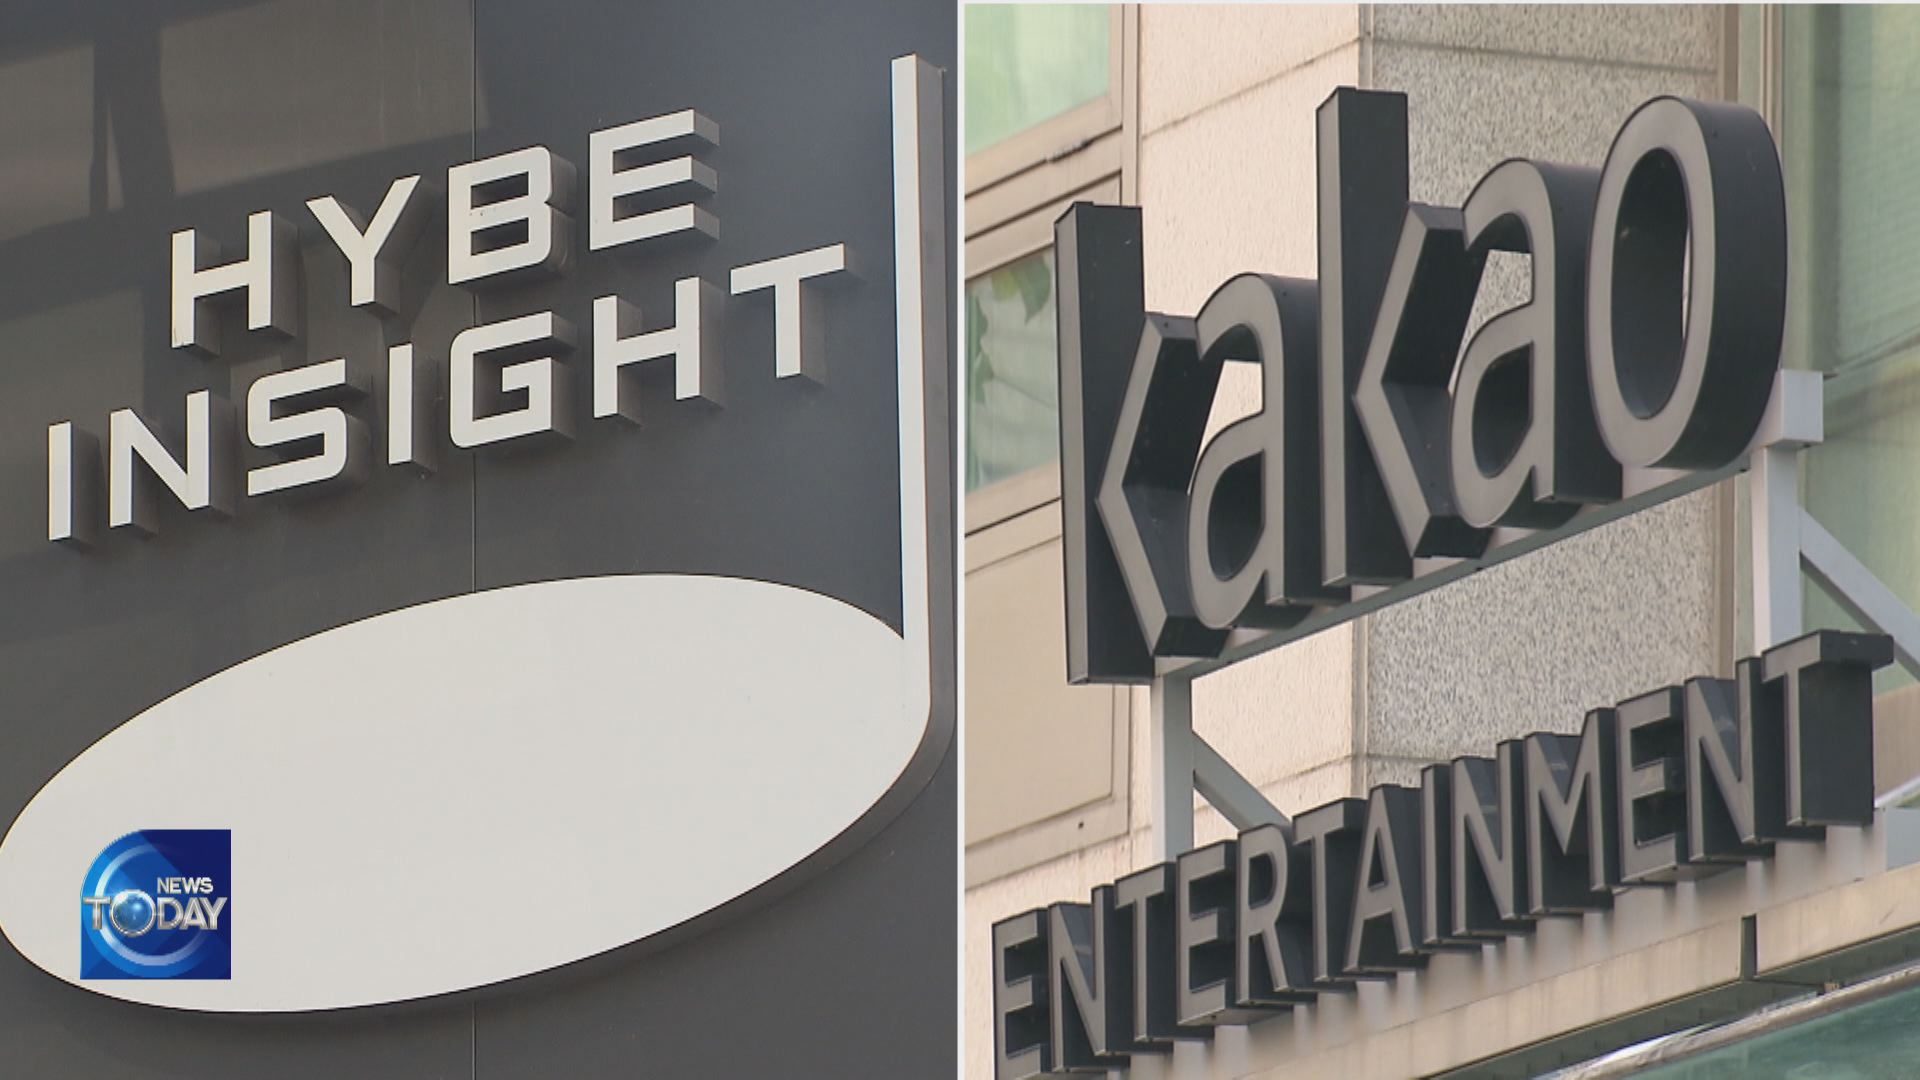 EYES ON IMPACT OF KAKAO’S SM TAKEOVER